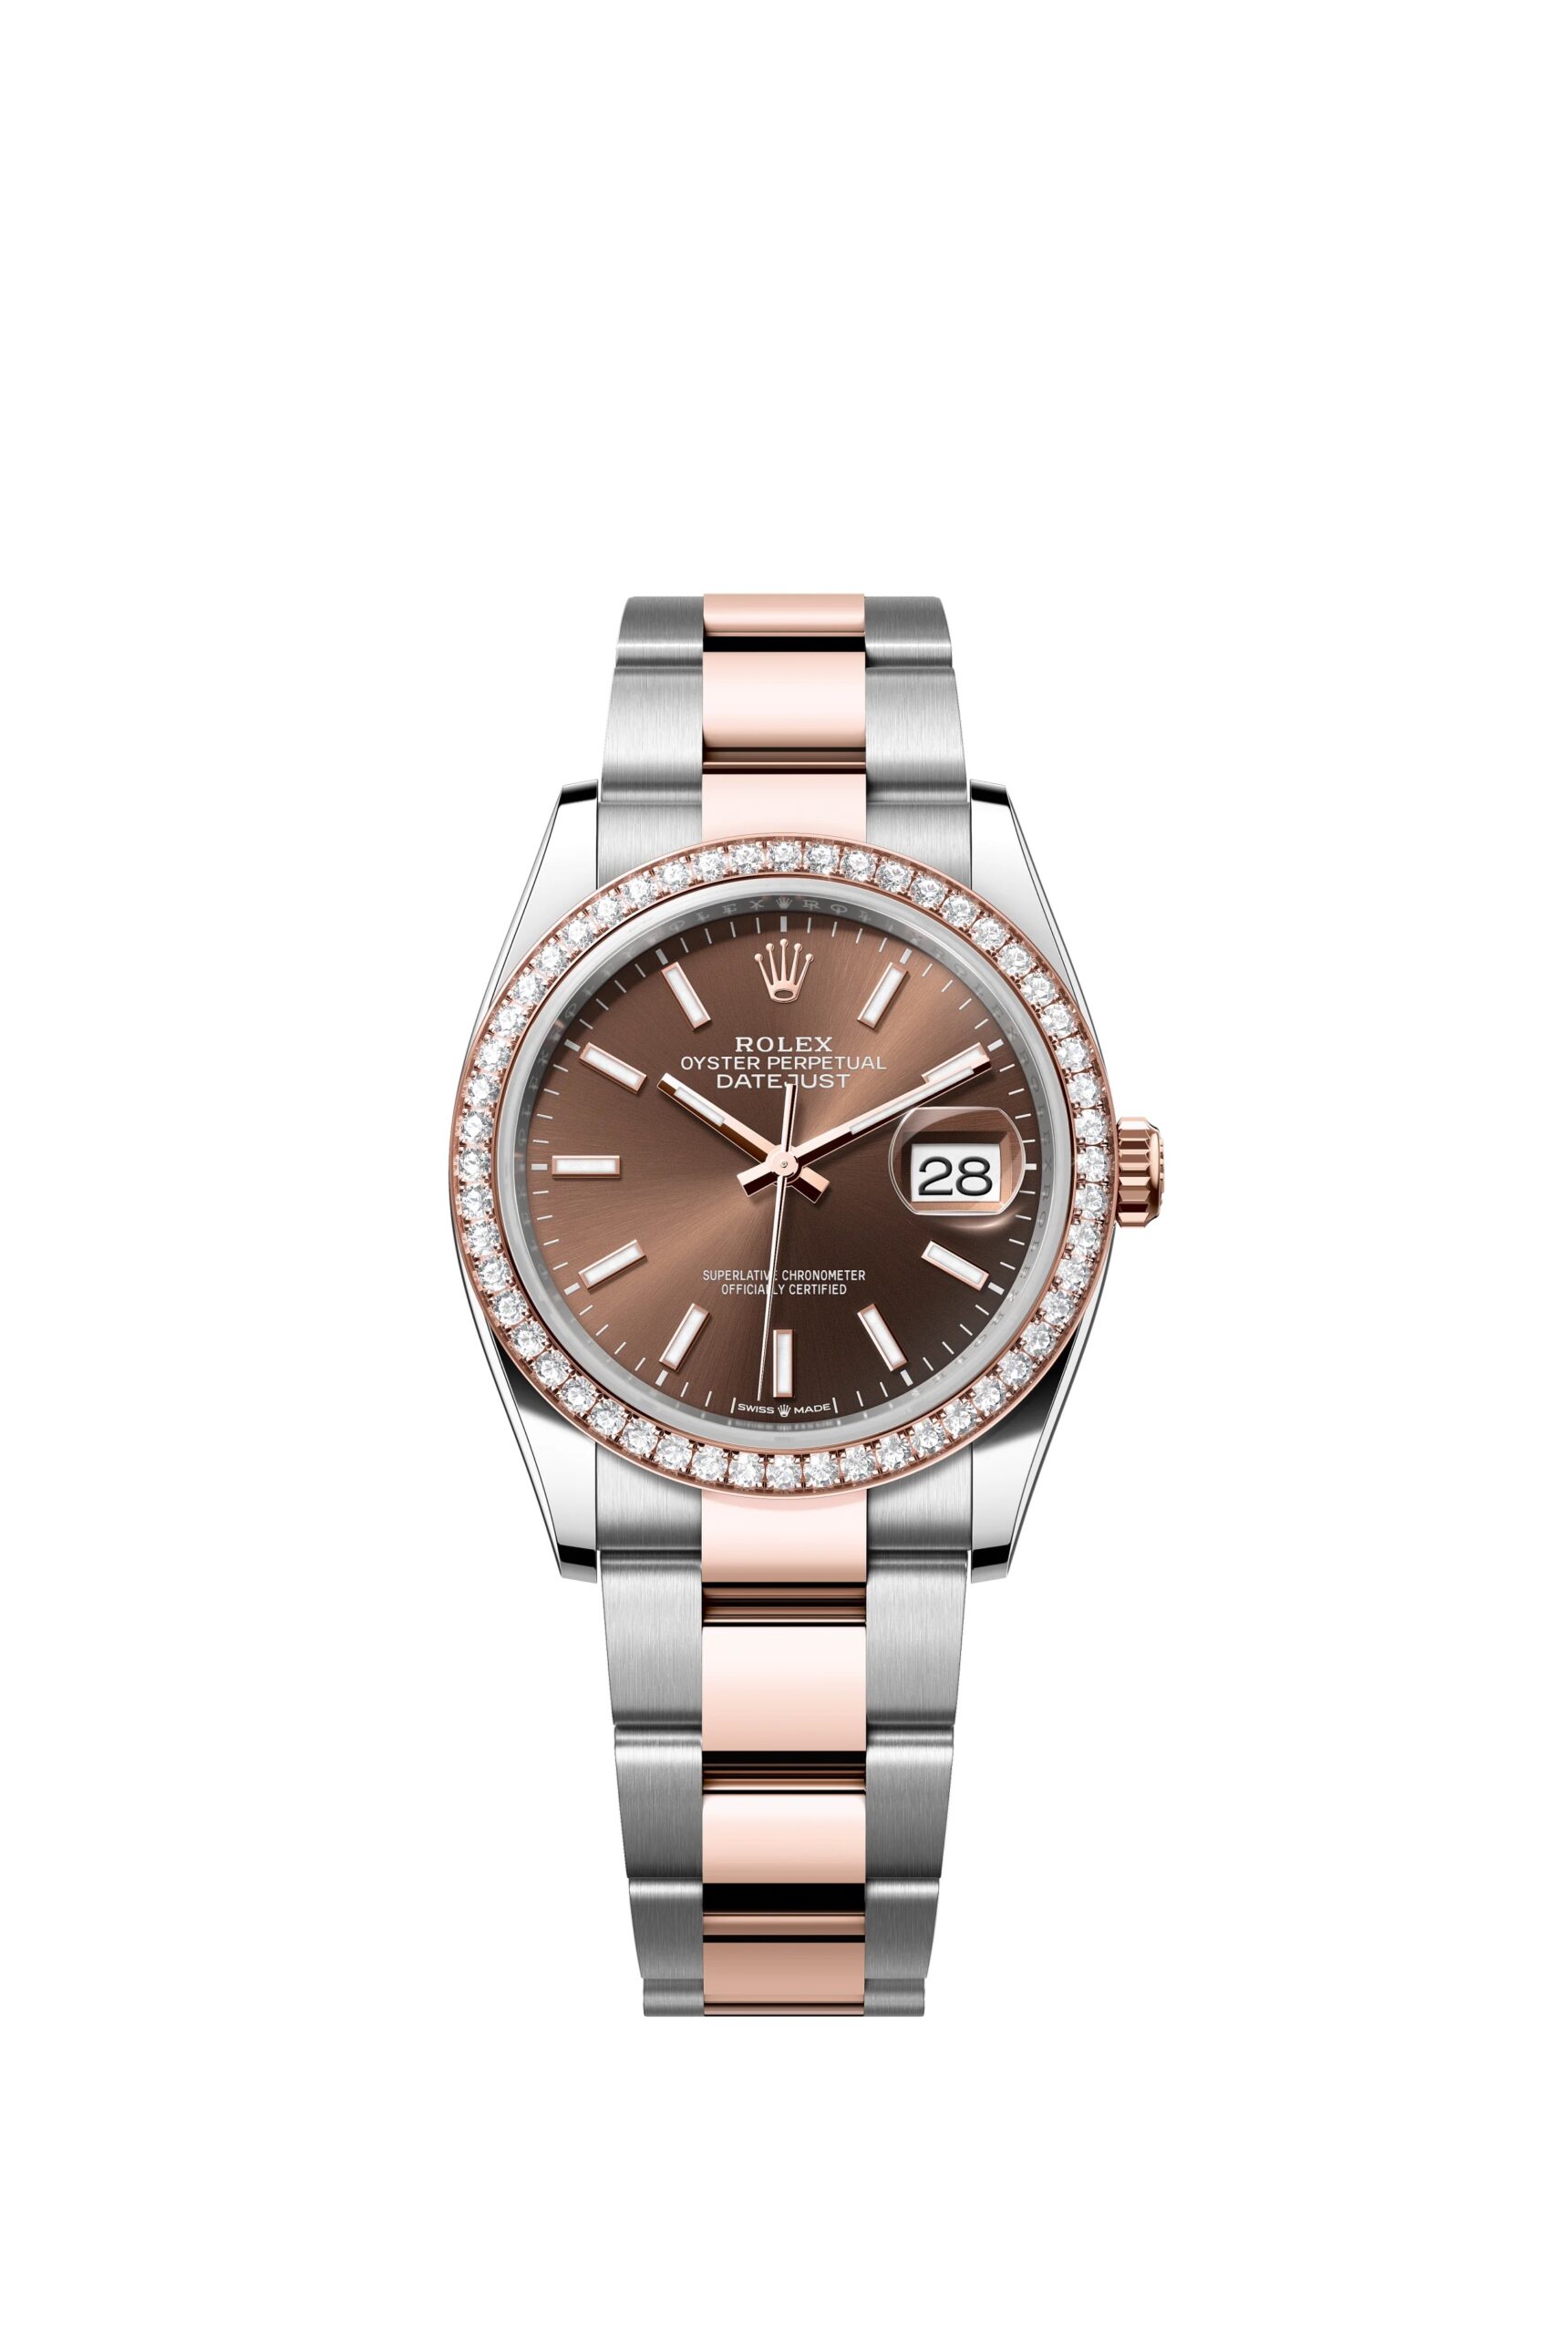 Rolex Datejust 36 Oyster, 36 mm, Oystersteel Everose gold and diamonds Reference 126281RBR